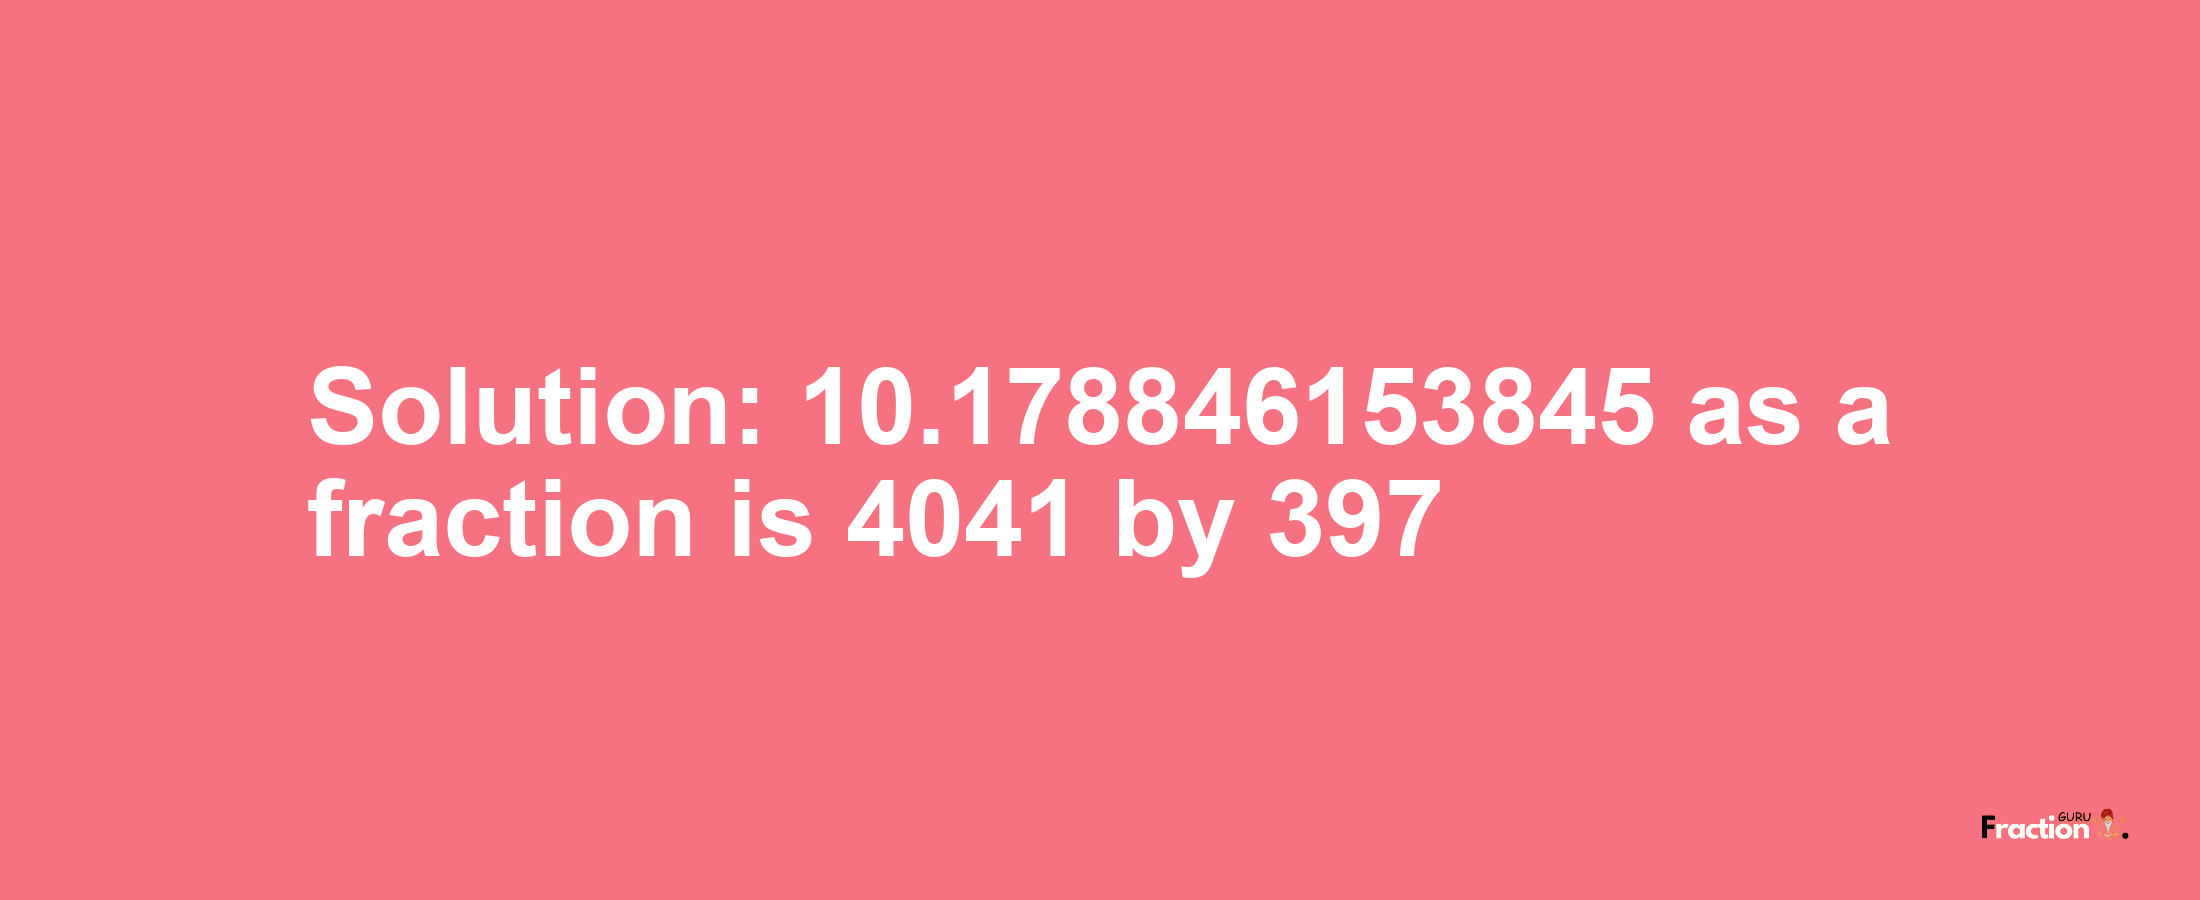 Solution:10.178846153845 as a fraction is 4041/397